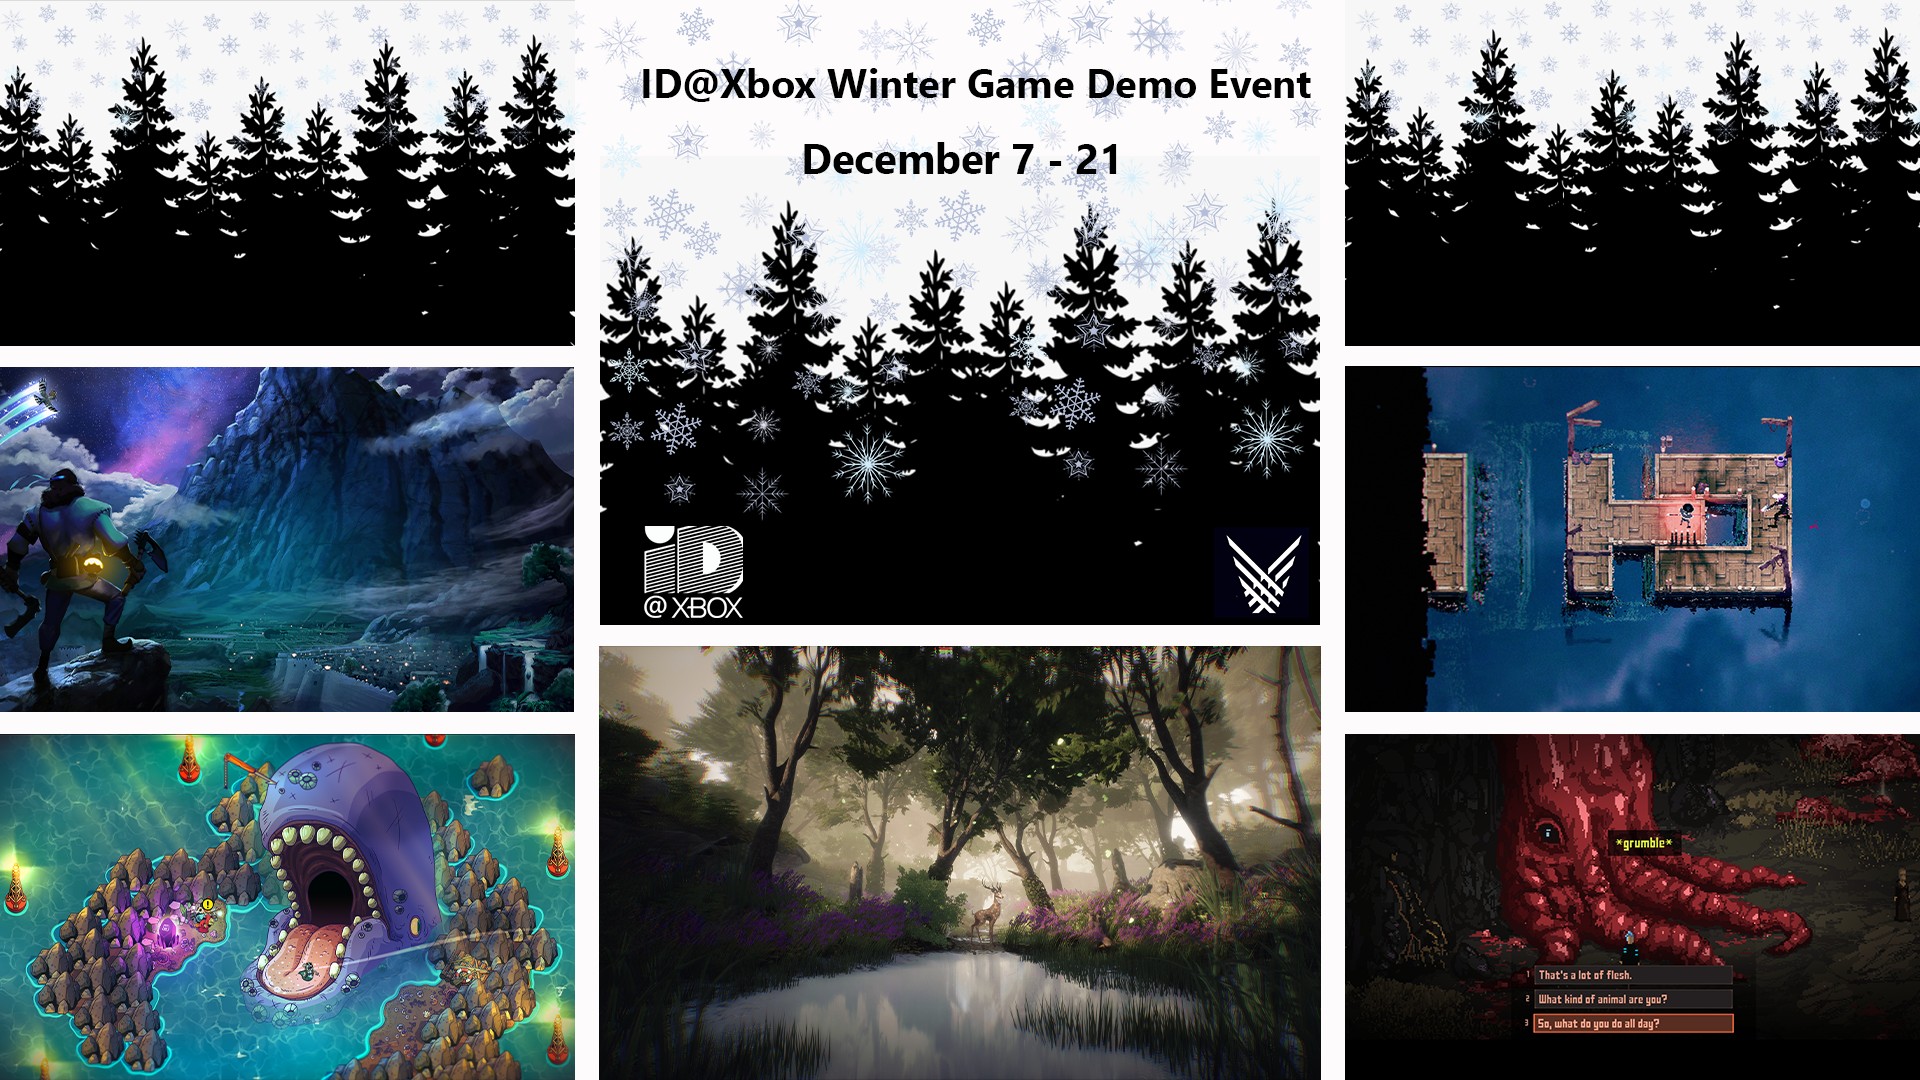 Play Over 70 New Xbox One Demos With Xbox Summer Game Fest Demo Event - Xbox  Wire